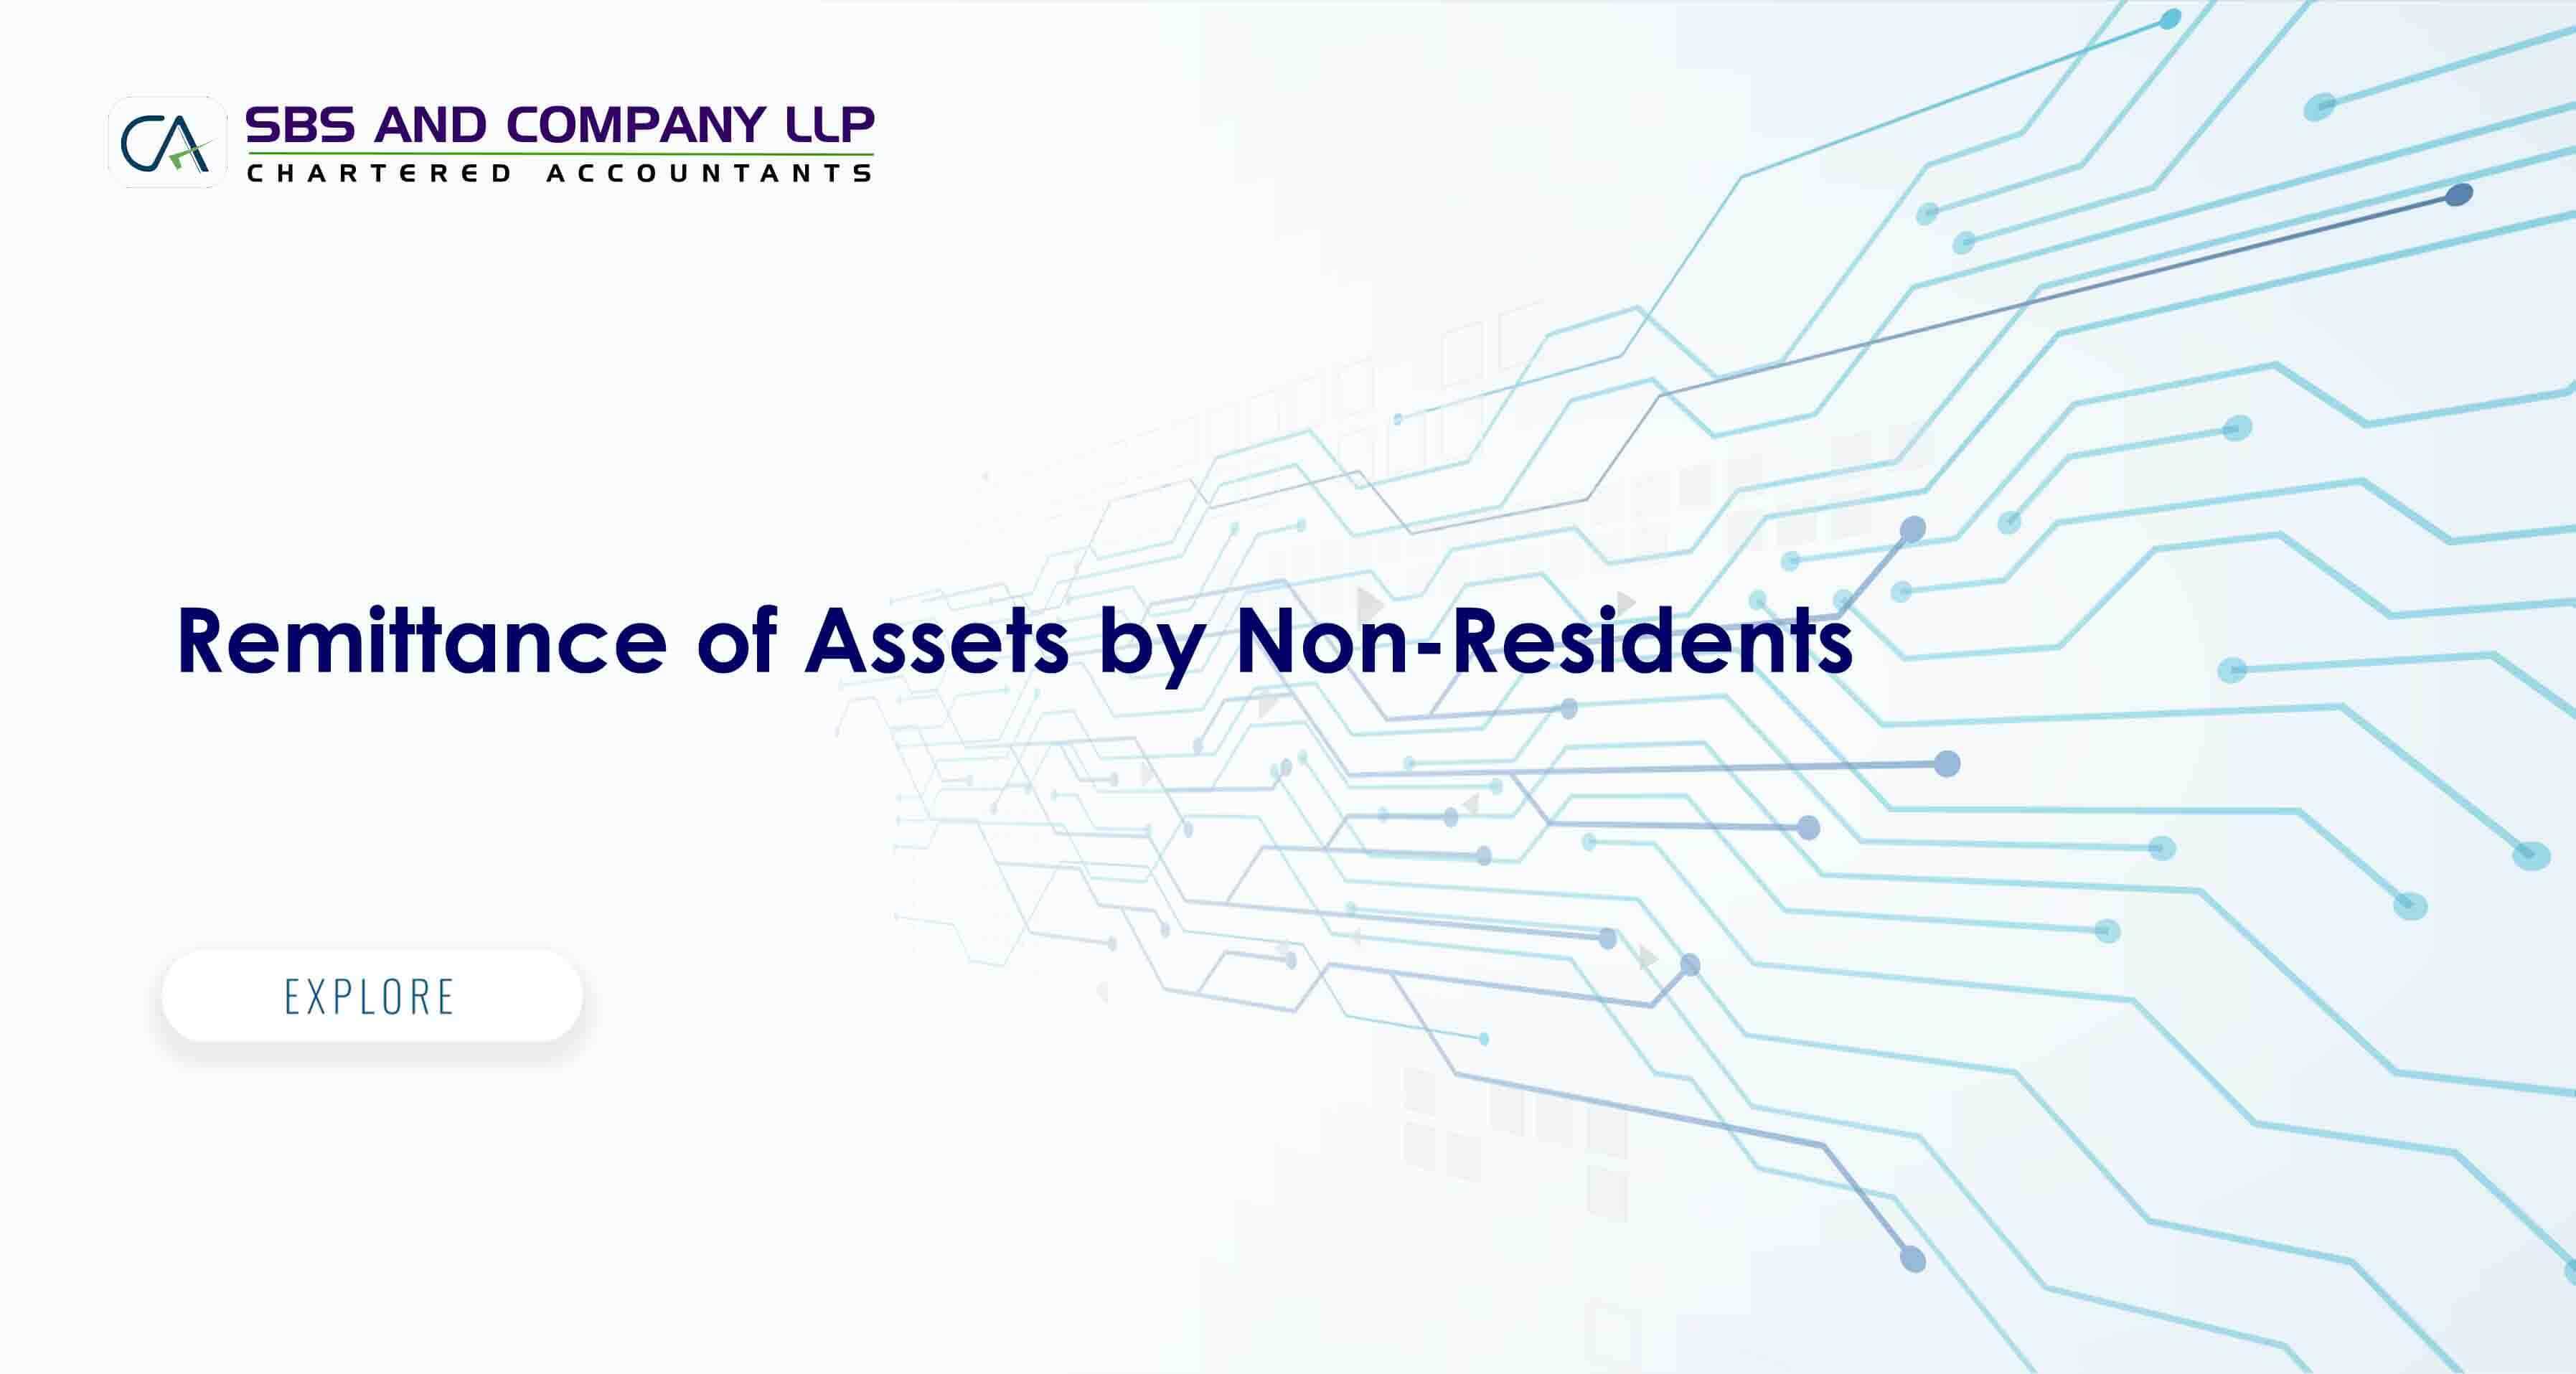 Remittance of Assets by Non-Residents